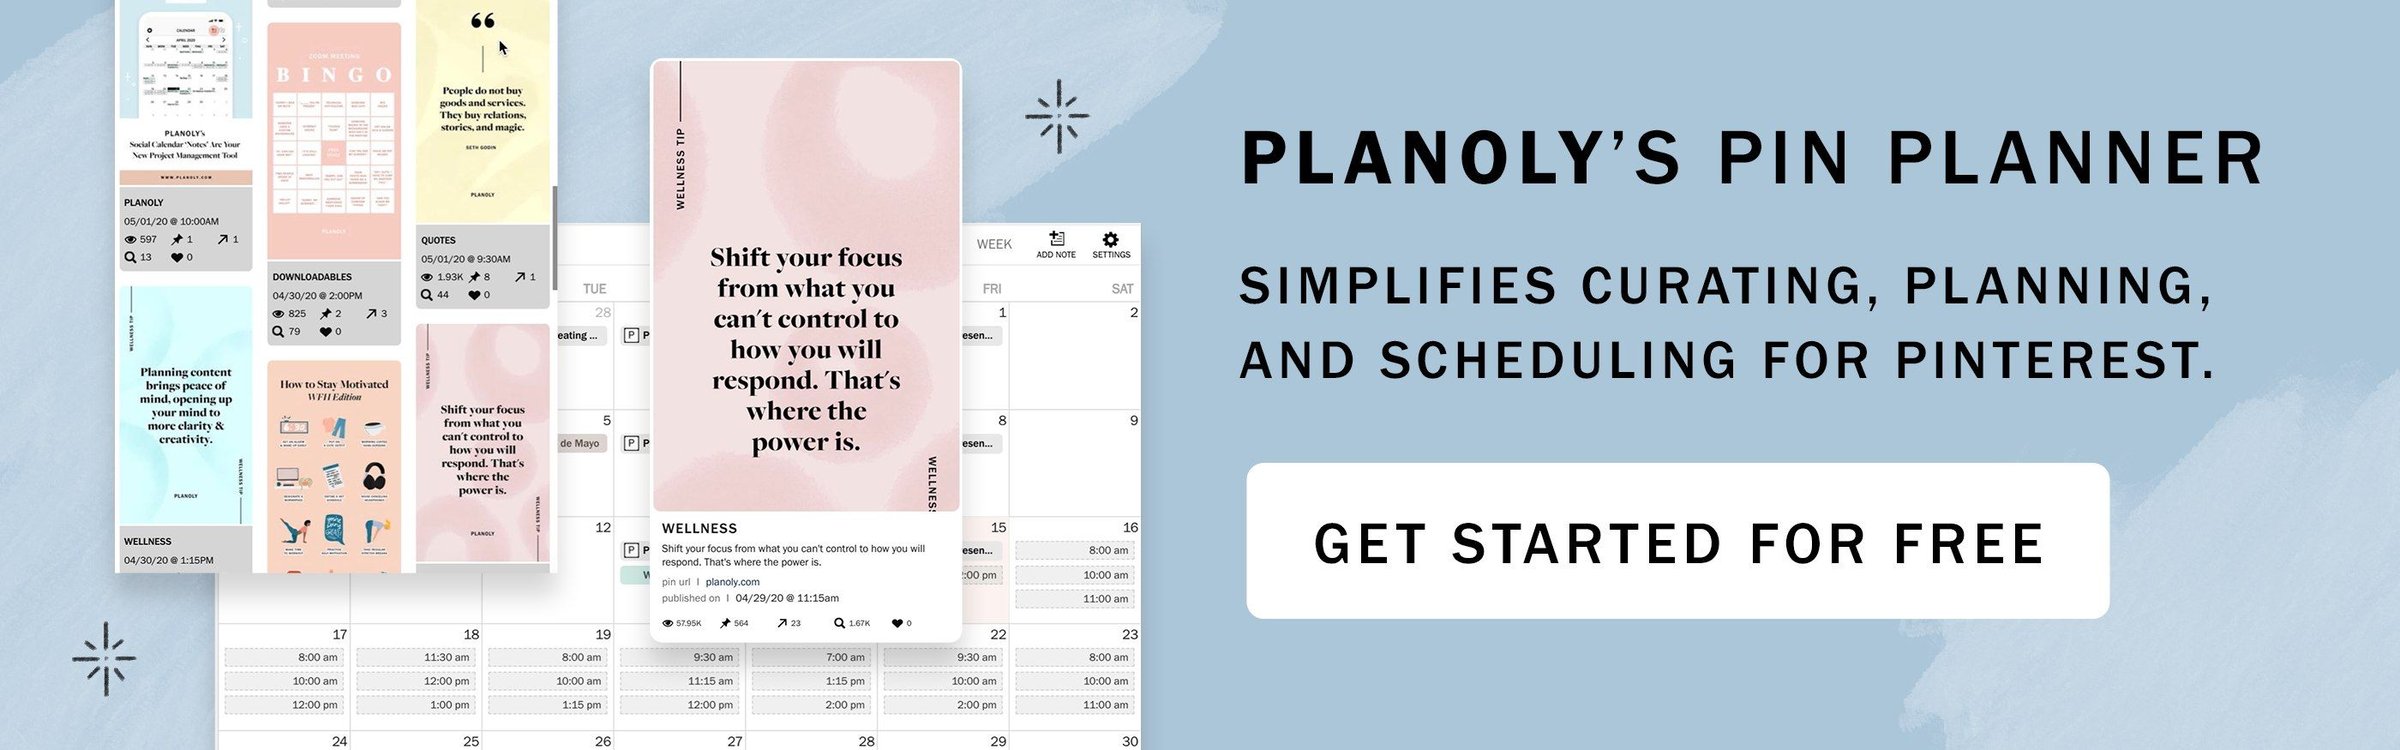 PLANOLY-Blog-Post-How-to-Use-Pinterest-CTA-Image